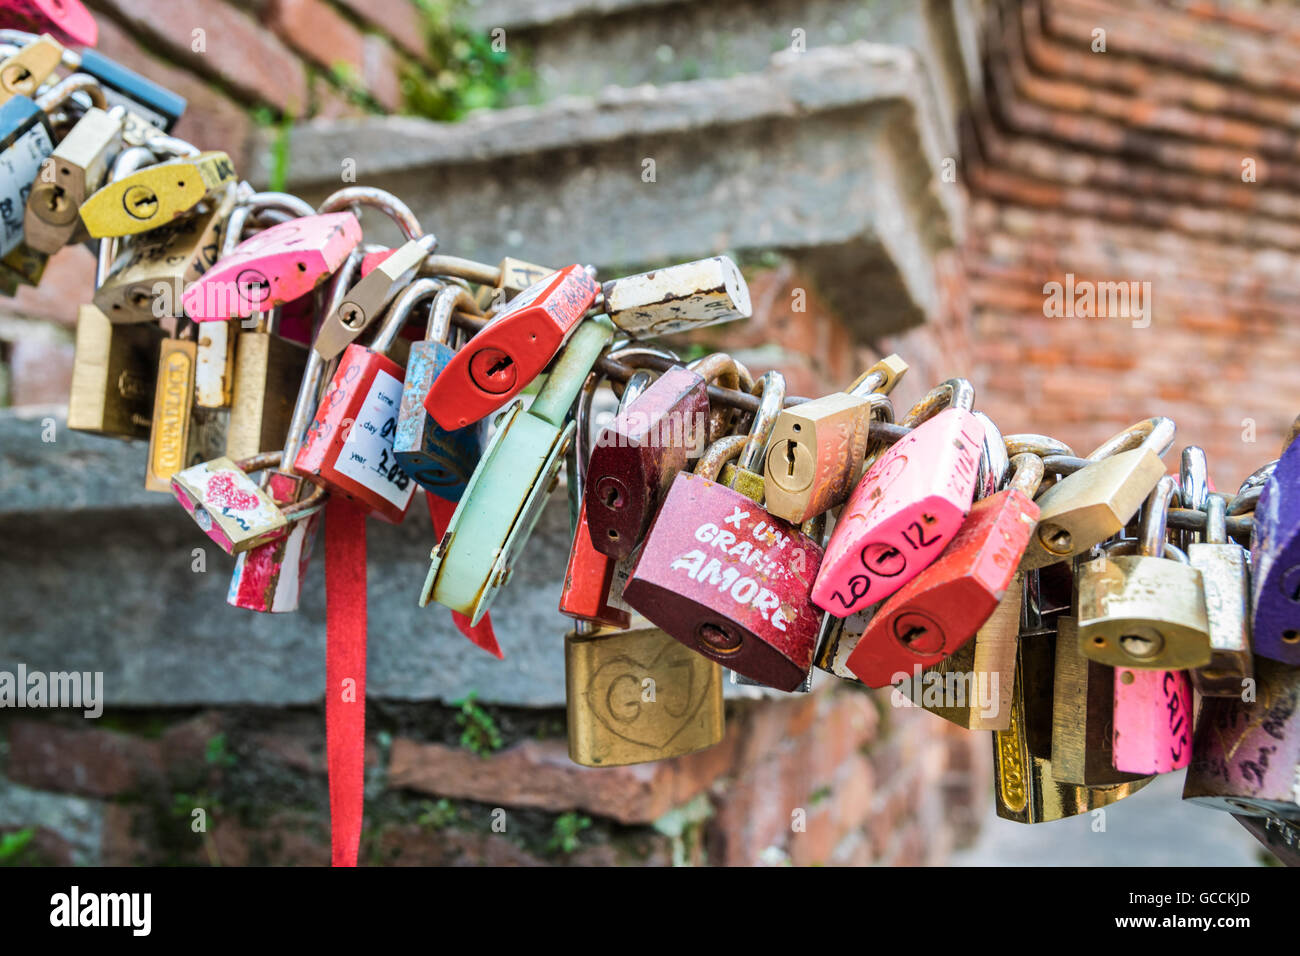 Padlocks left by lovers in Verona as a promise of love. Stock Photo